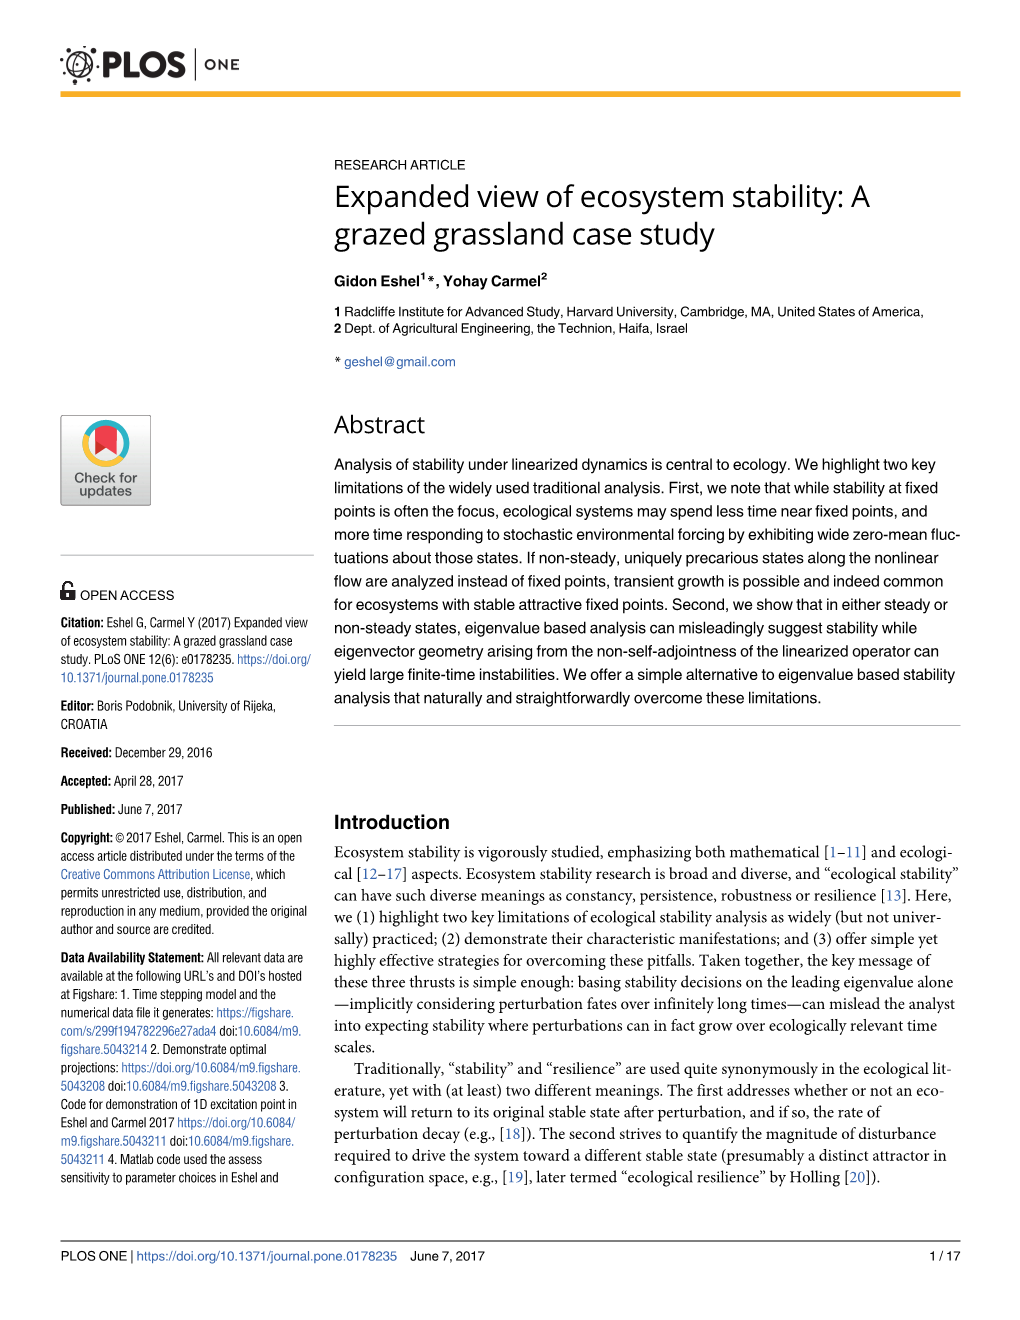 Expanded View of Ecosystem Stability: a Grazed Grassland Case Study